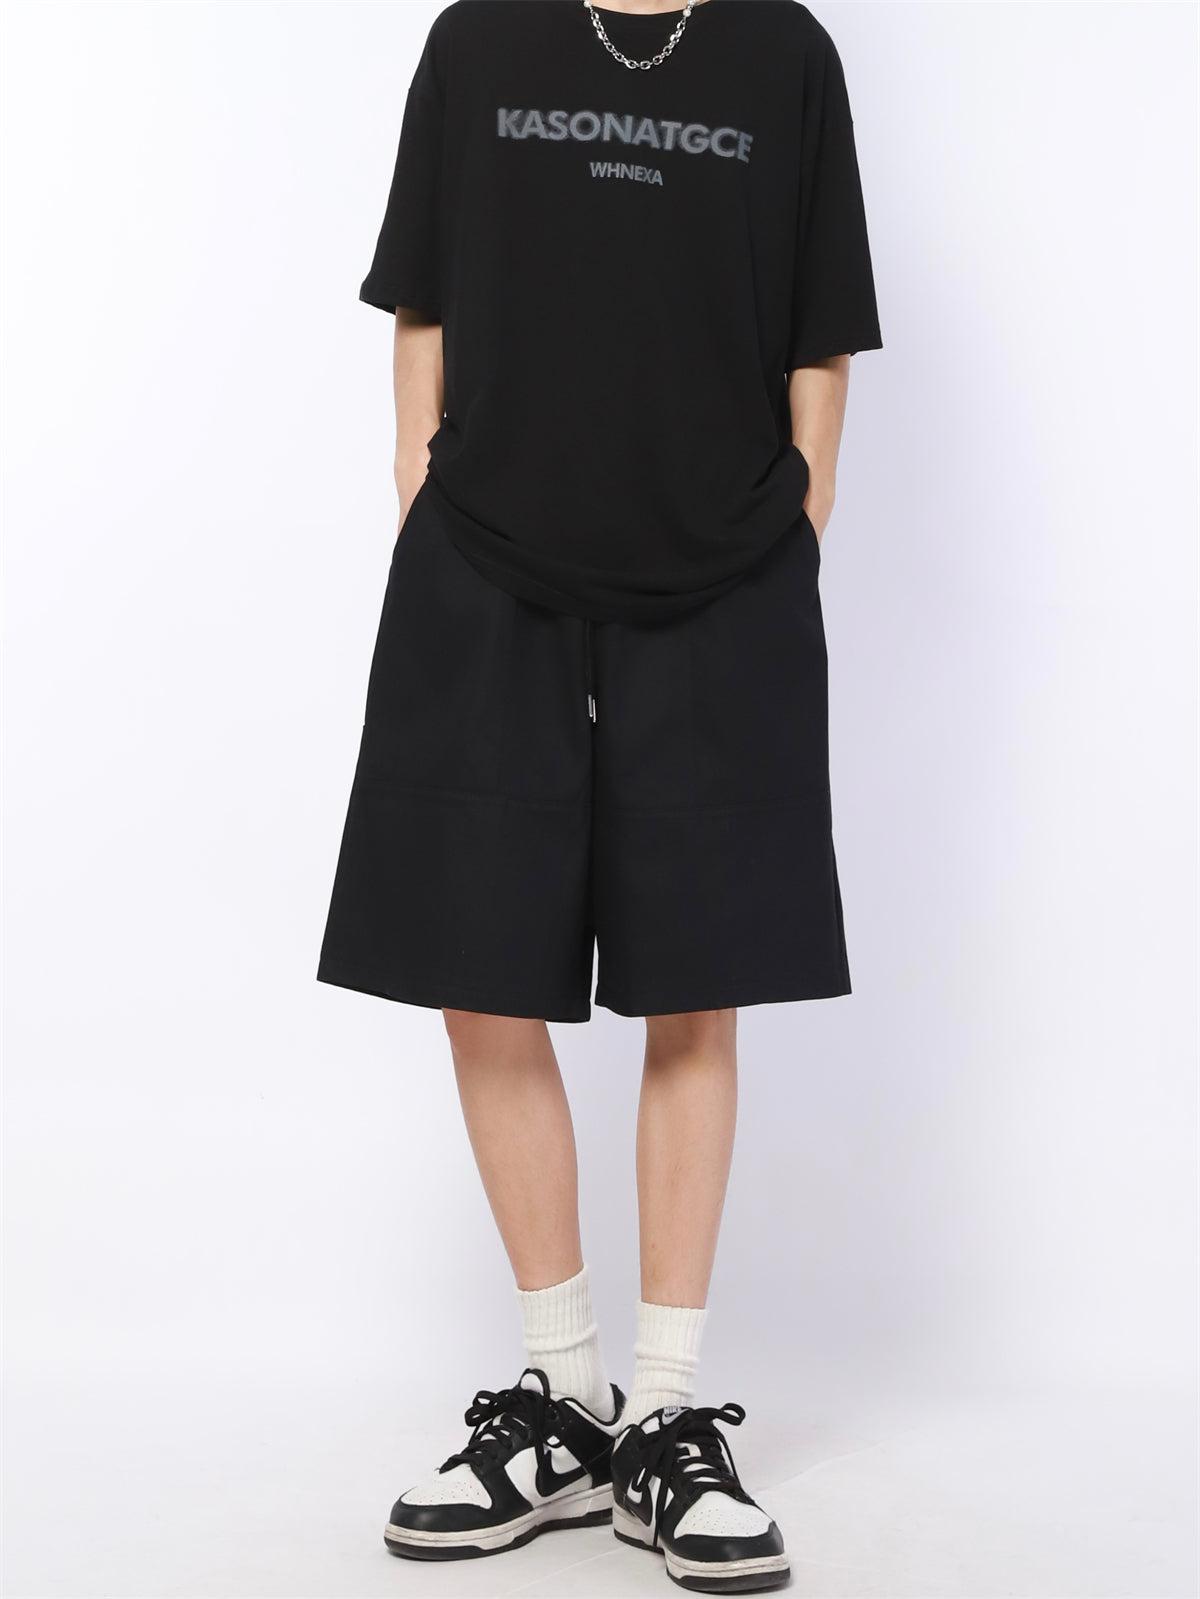 Pocket Trim Embroidery Shorts Korean Street Fashion Shorts By Made Extreme Shop Online at OH Vault